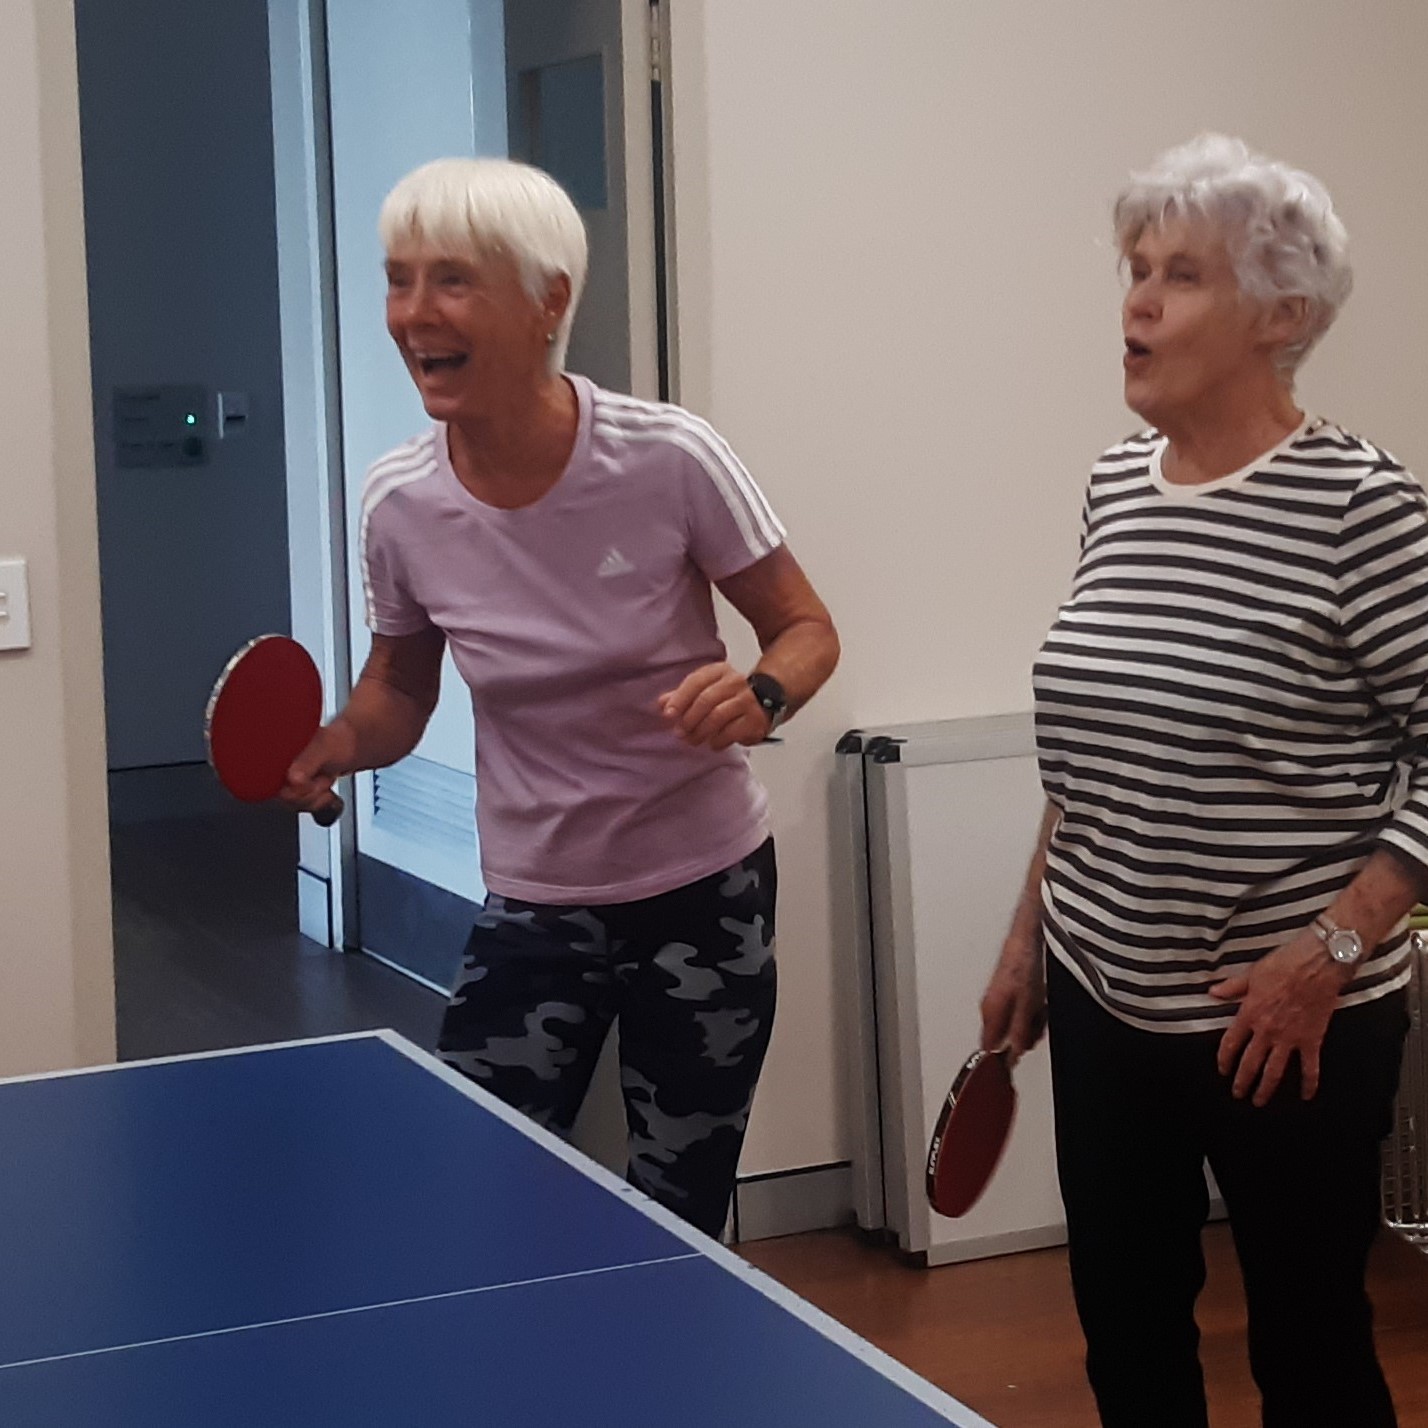 Two women playing table tennis